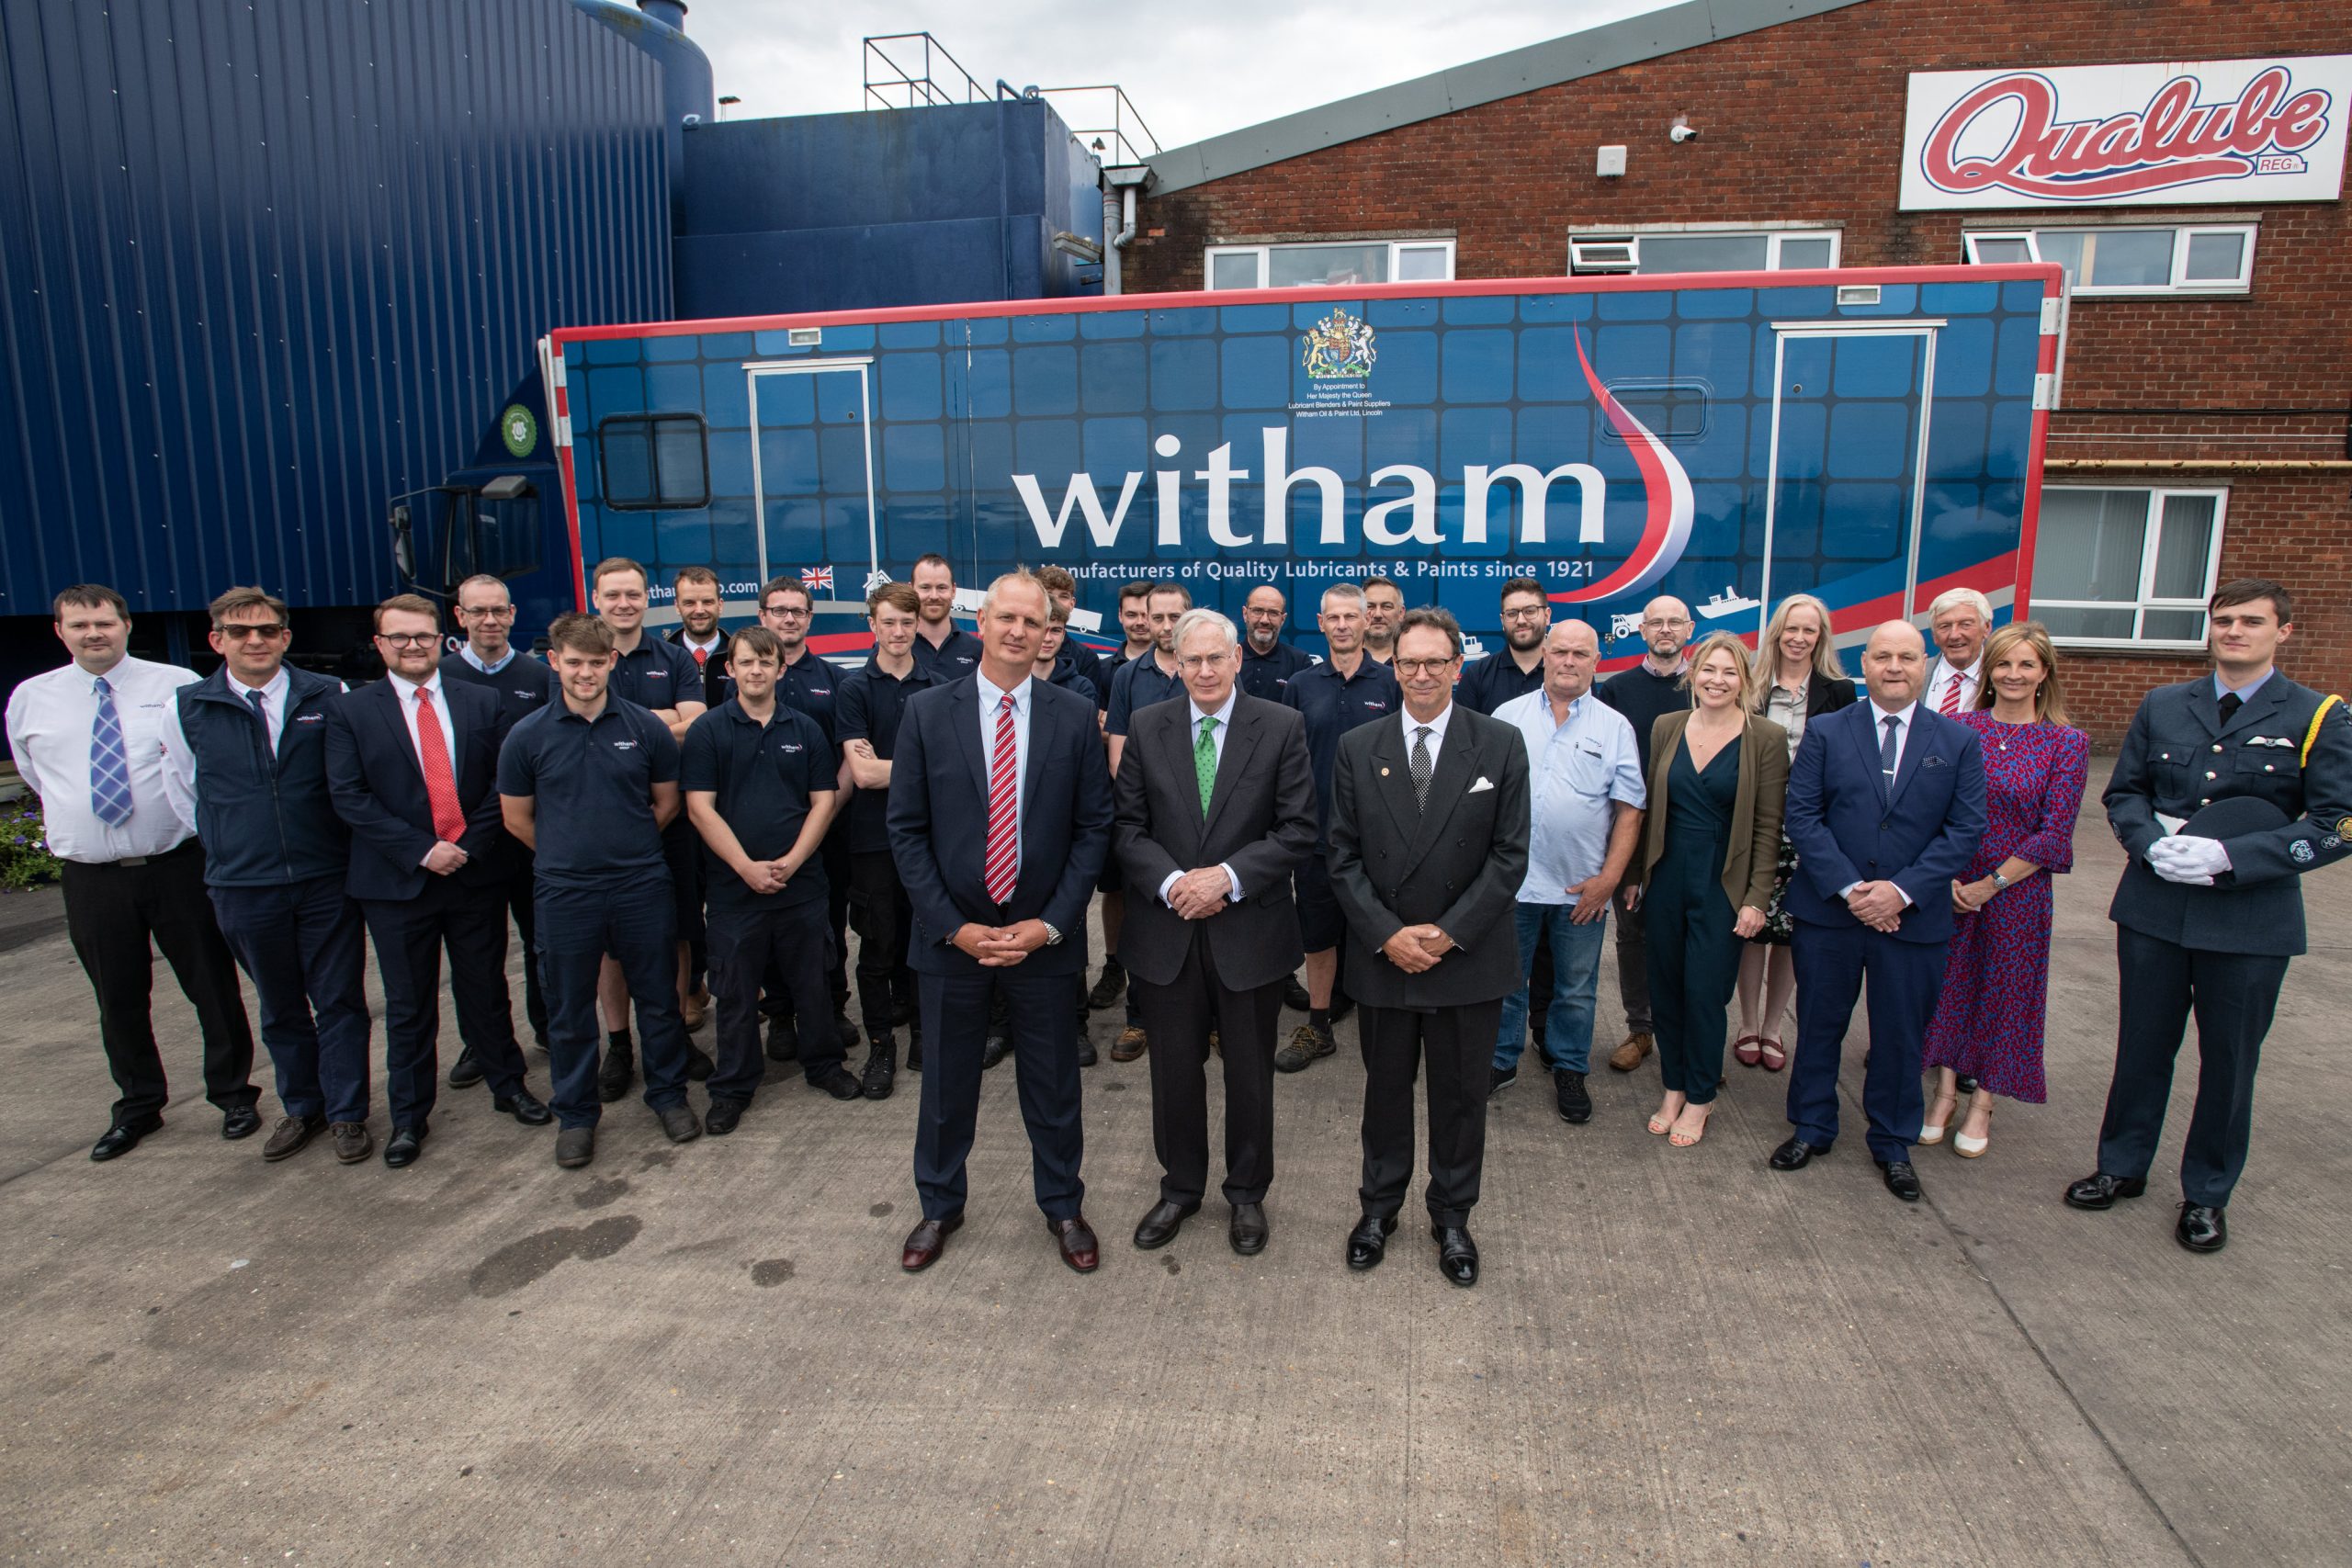 The Witham Group recently hosted visit from HRH The Duke of Gloucester.